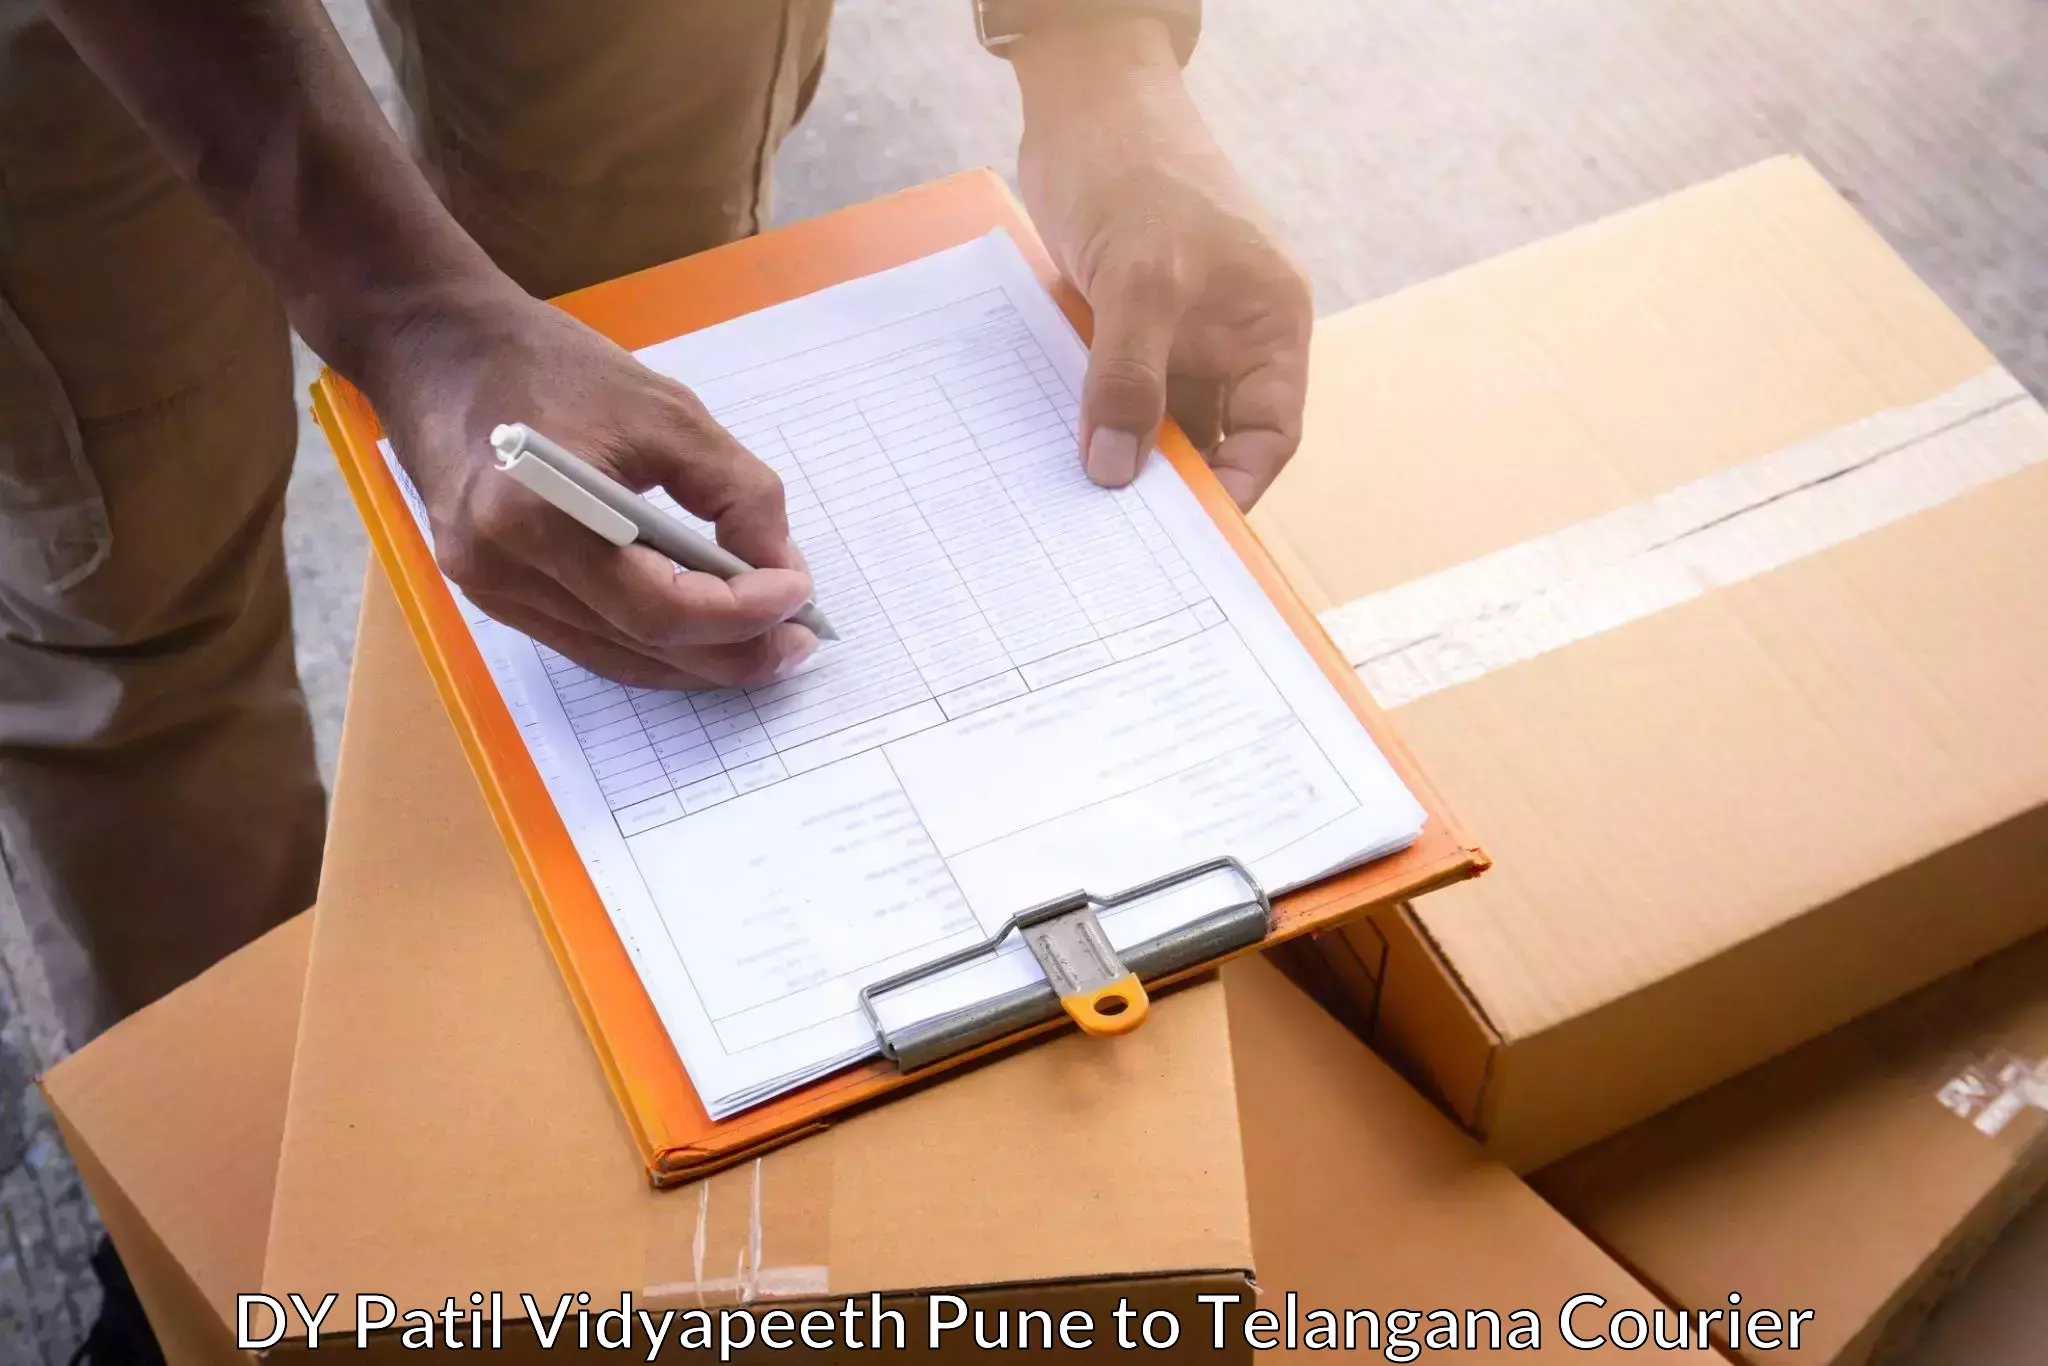 Courier services DY Patil Vidyapeeth Pune to Kacheguda